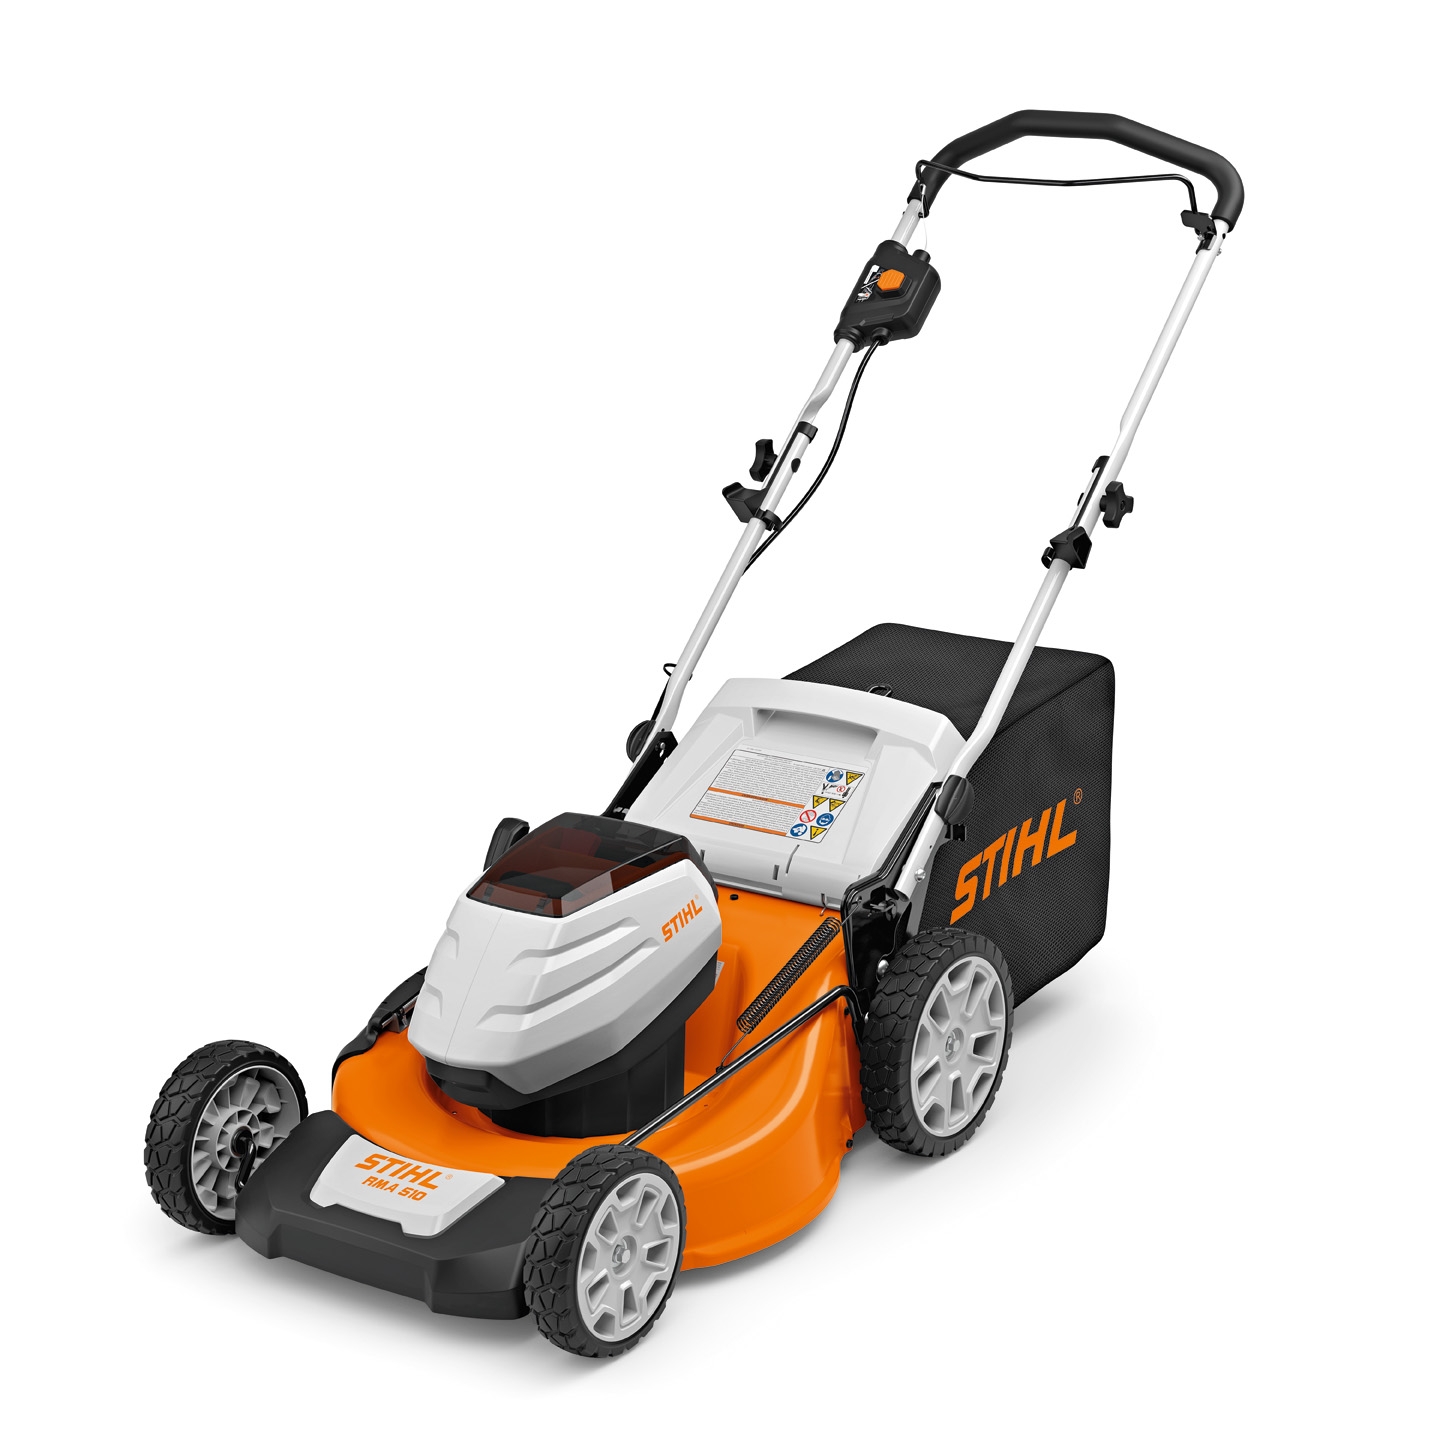 STIHL RMA 2 cordless lawn mower from the AP-System